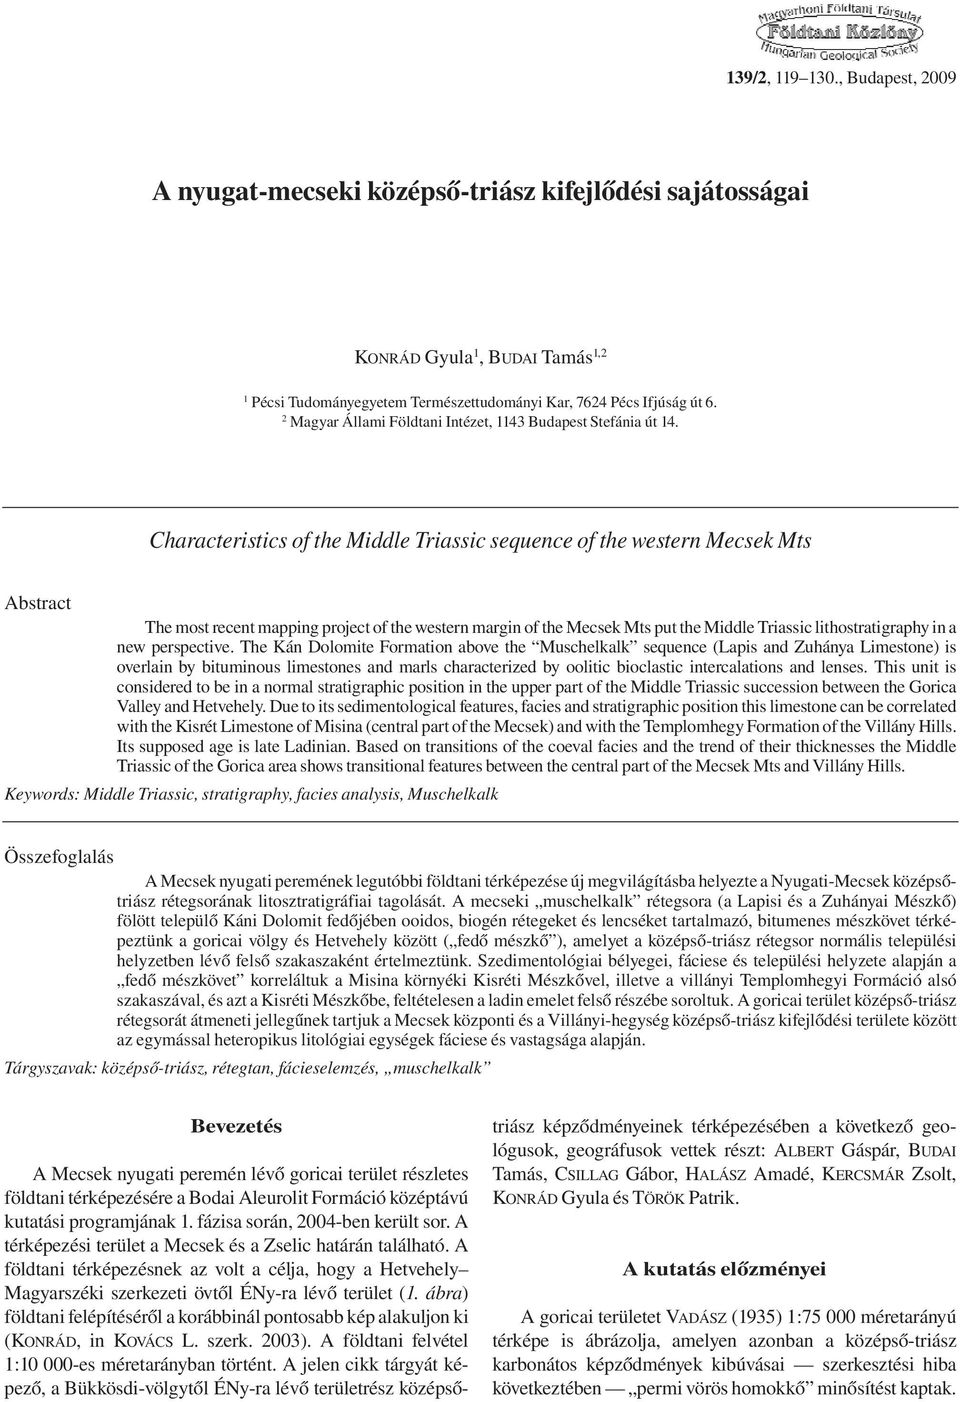 Characteristics of the Middle Triassic sequence of the western Mecsek Mts Abstract The most recent mapping project of the western margin of the Mecsek Mts put the Middle Triassic lithostratigraphy in